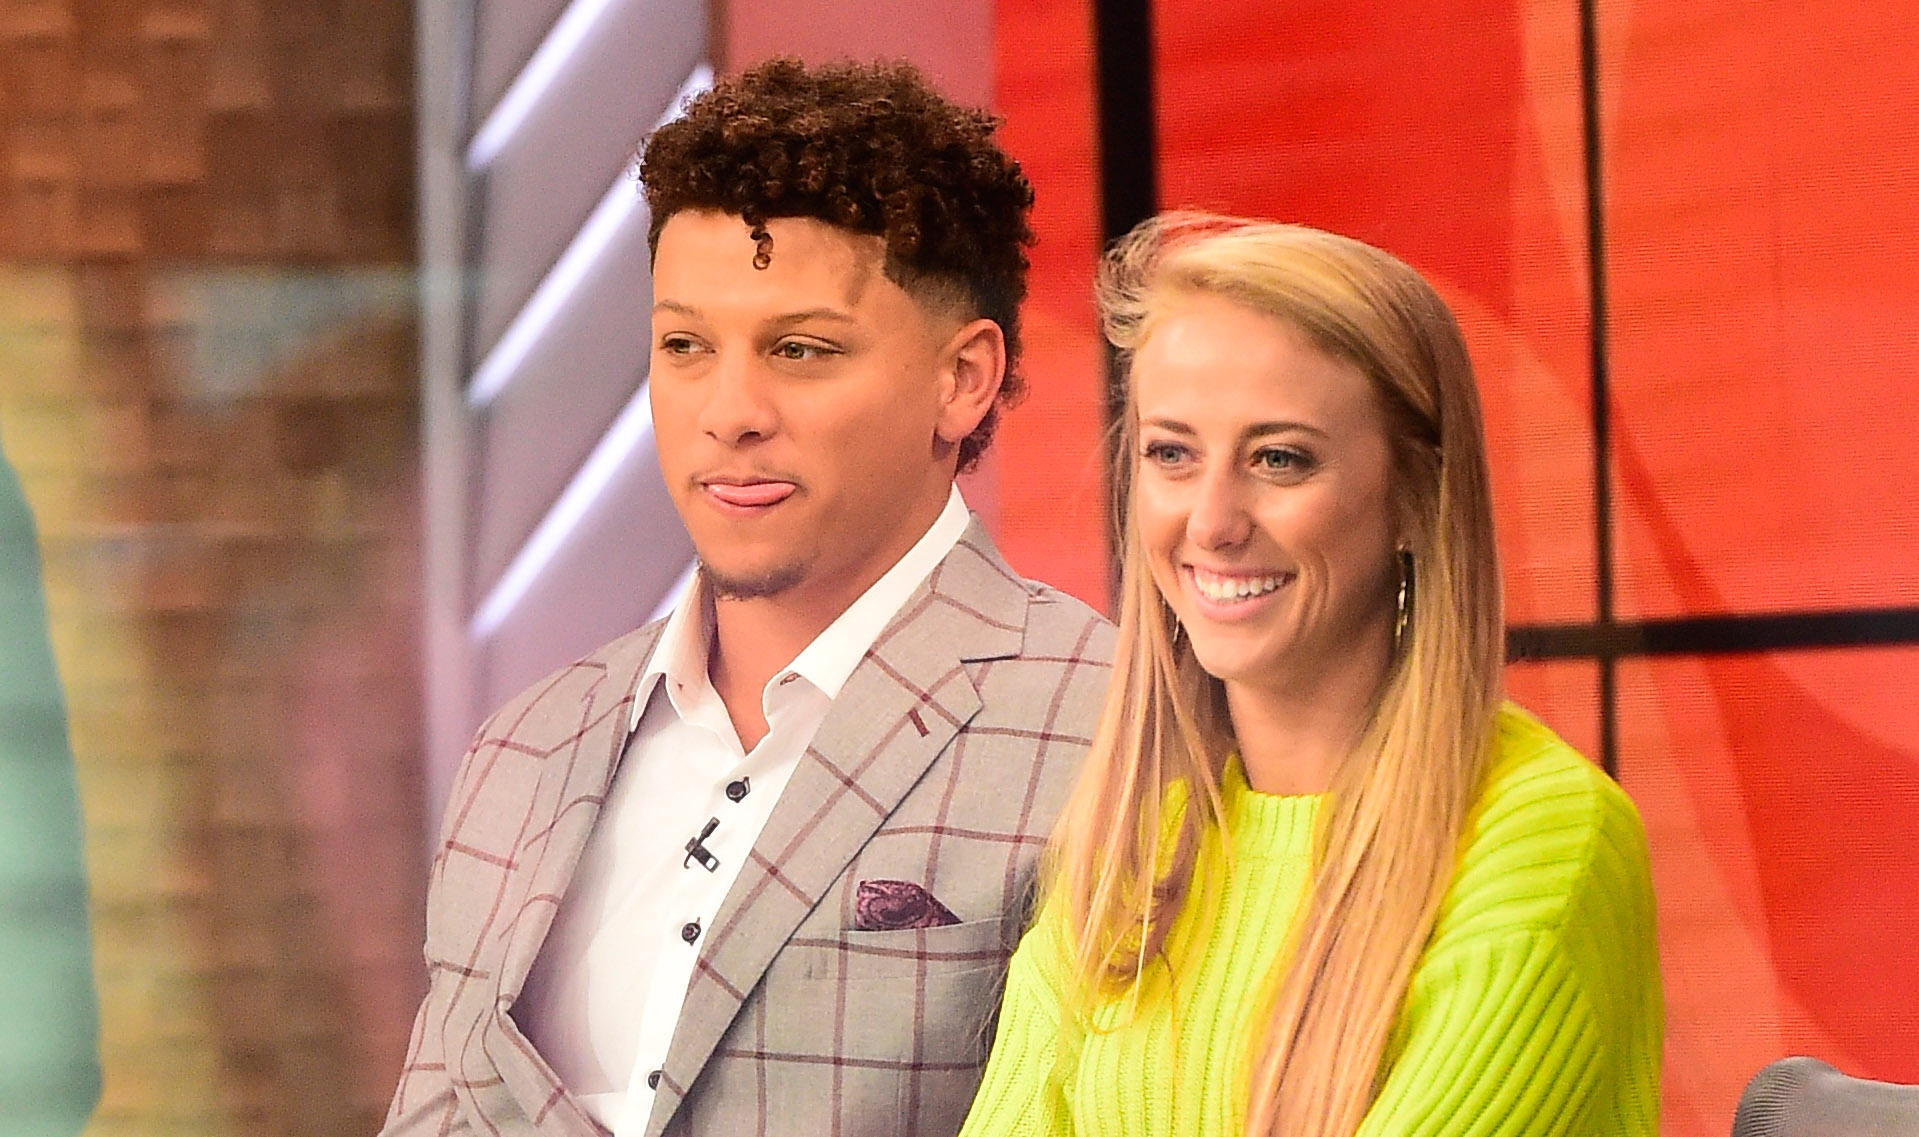 patrick-mahomes-and-brittany-matthews-show-off-their-dream-house-180-shoes.jpg